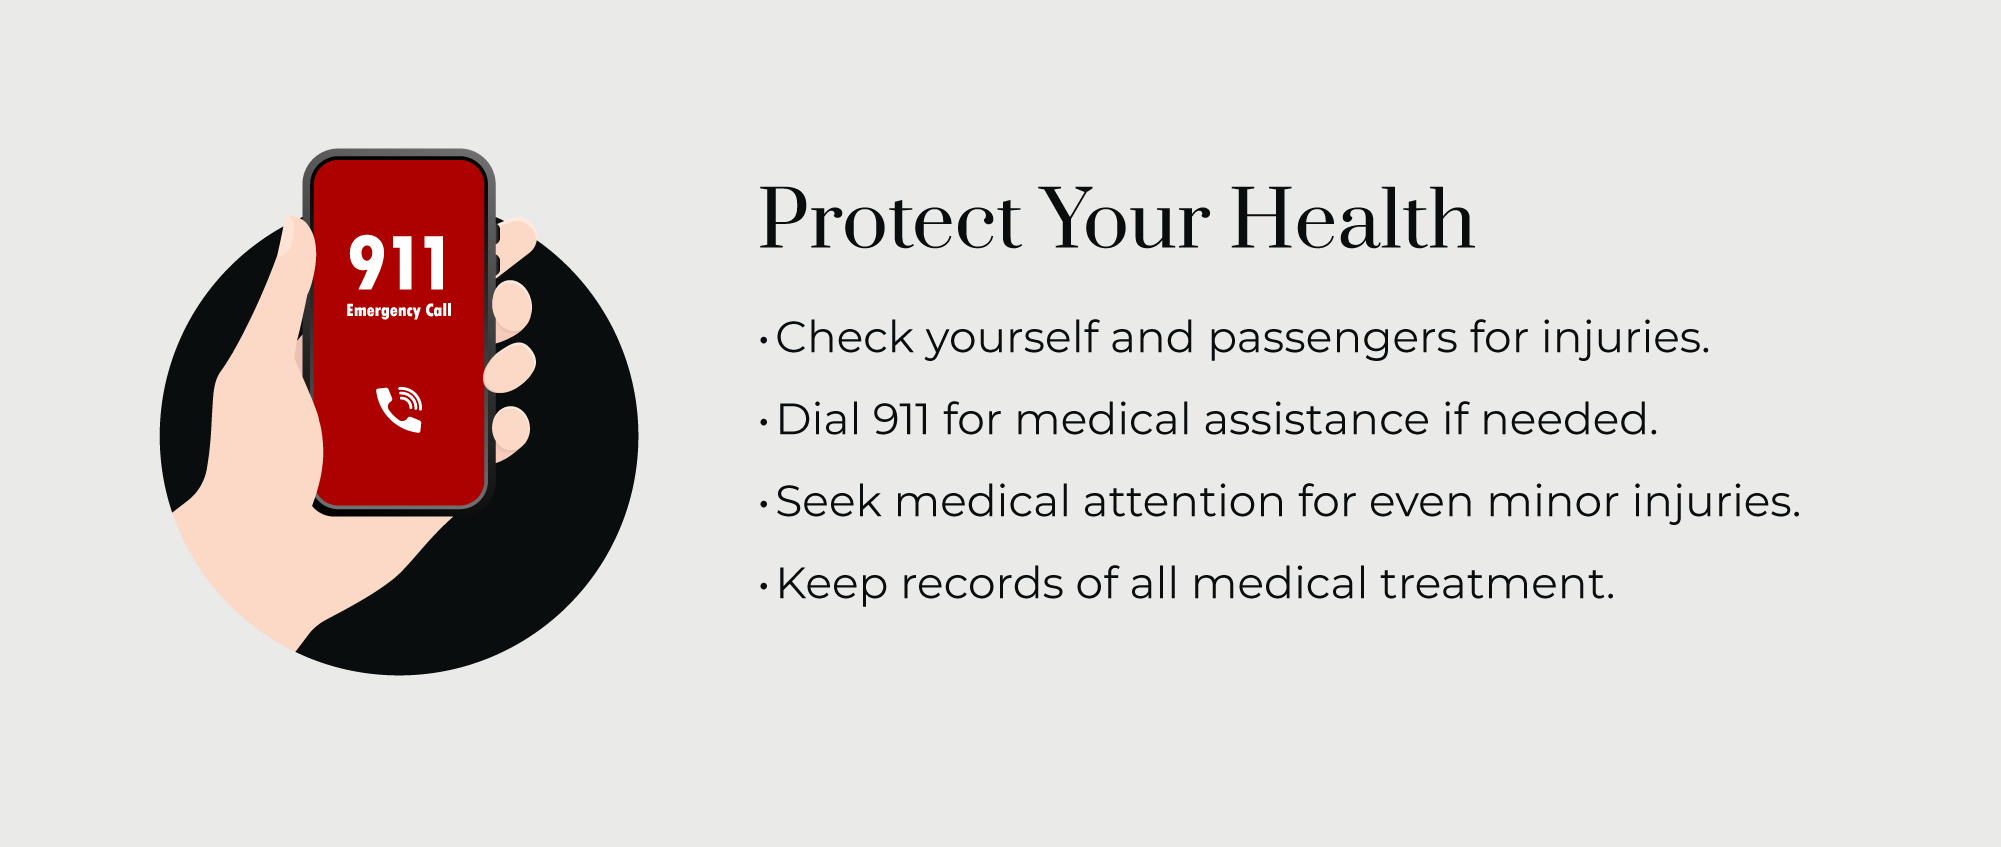 Protect your health